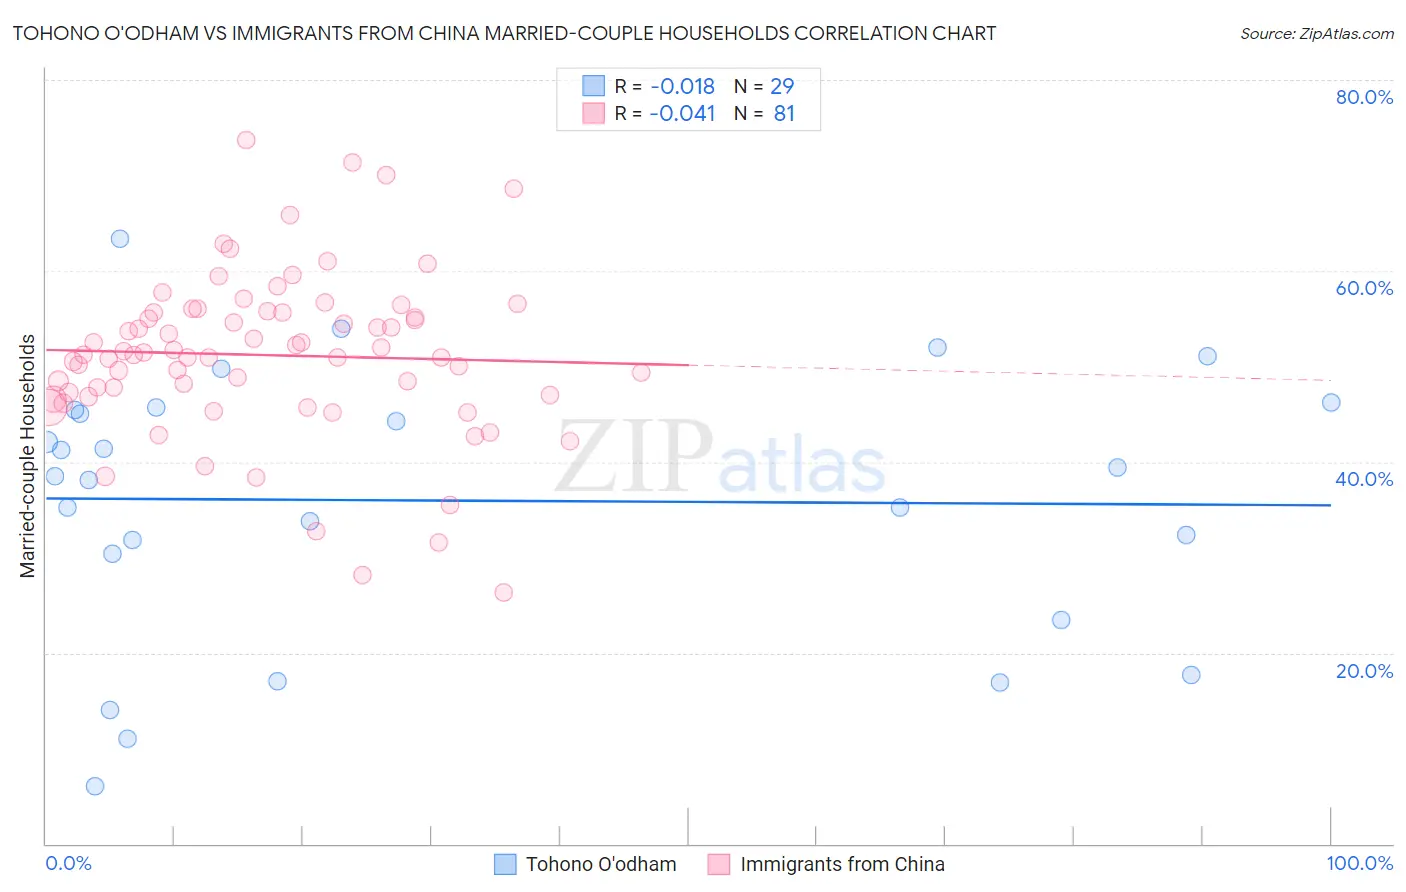 Tohono O'odham vs Immigrants from China Married-couple Households